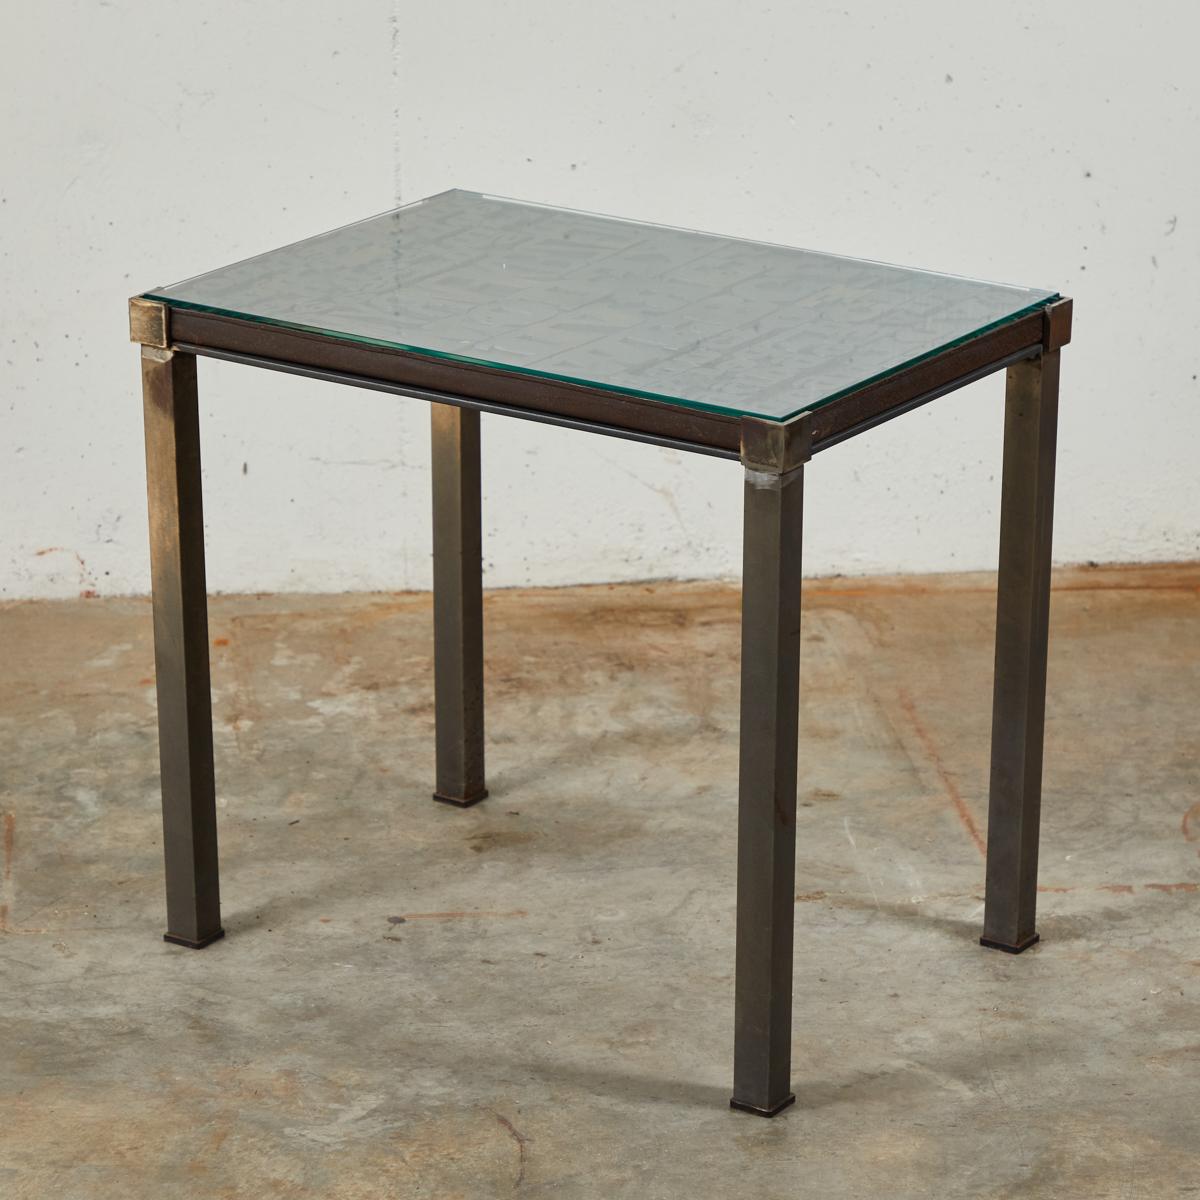 Industrial glass top table with graphic lettered top. The table began its life as a typeface tray in late 19th-century France. Having since been mounted on rectangular iron legs and given a glass top, the table's design reflects its industrial